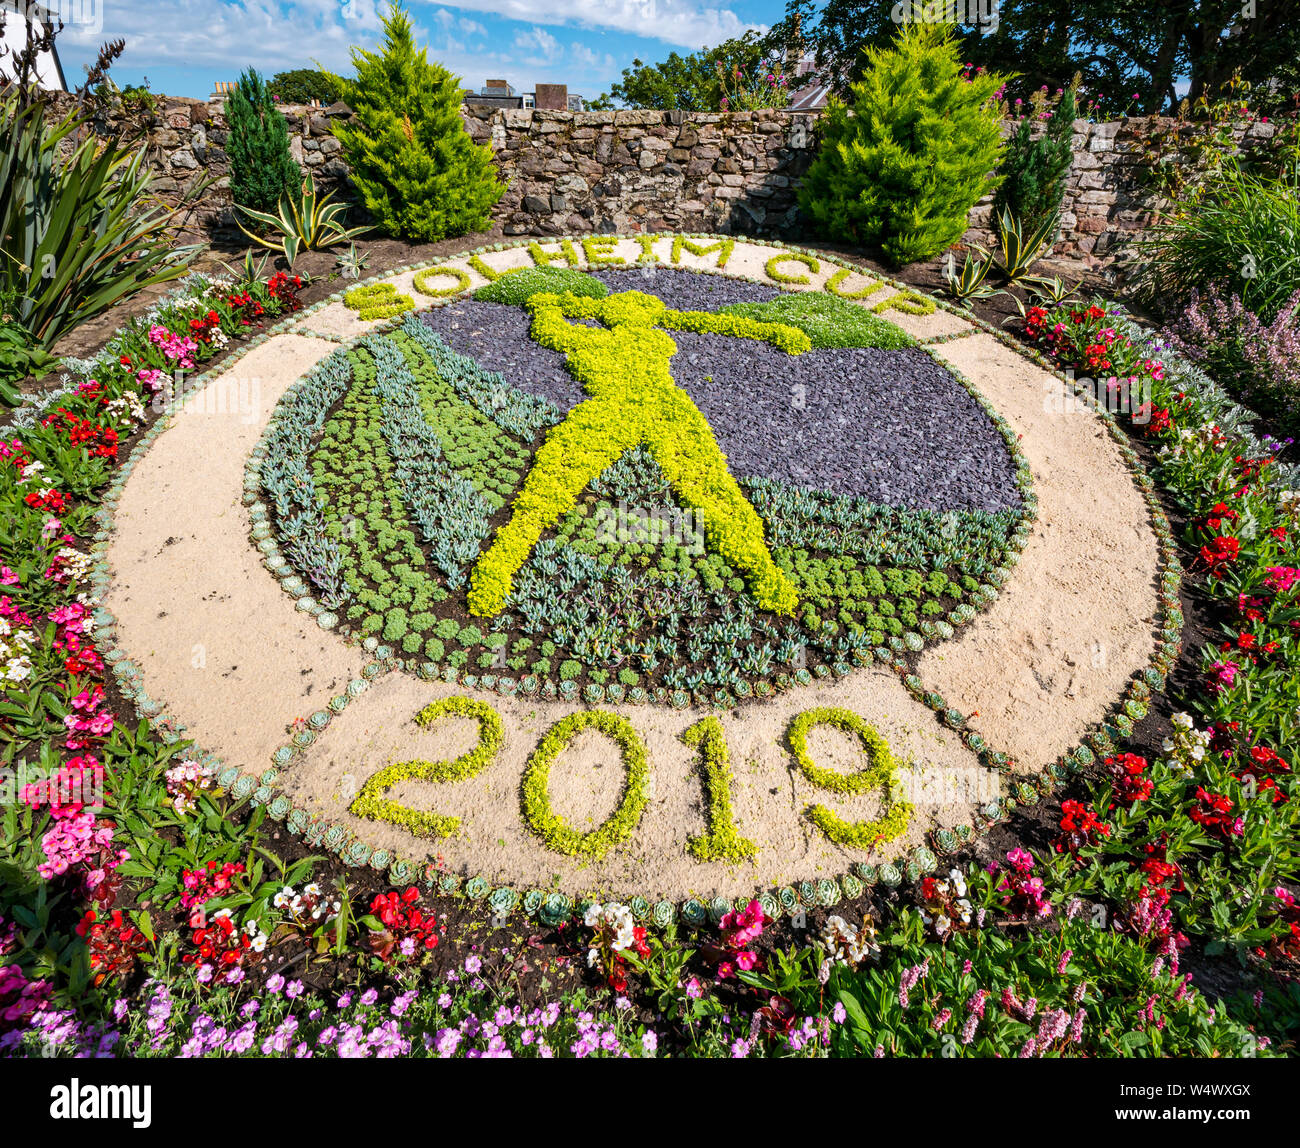 Solheim Cup with depiction of professional golfer swinging golf club in flower bed, Lodge Grounds garden, North Berwick, East Lothian, Scotland, UK Stock Photo